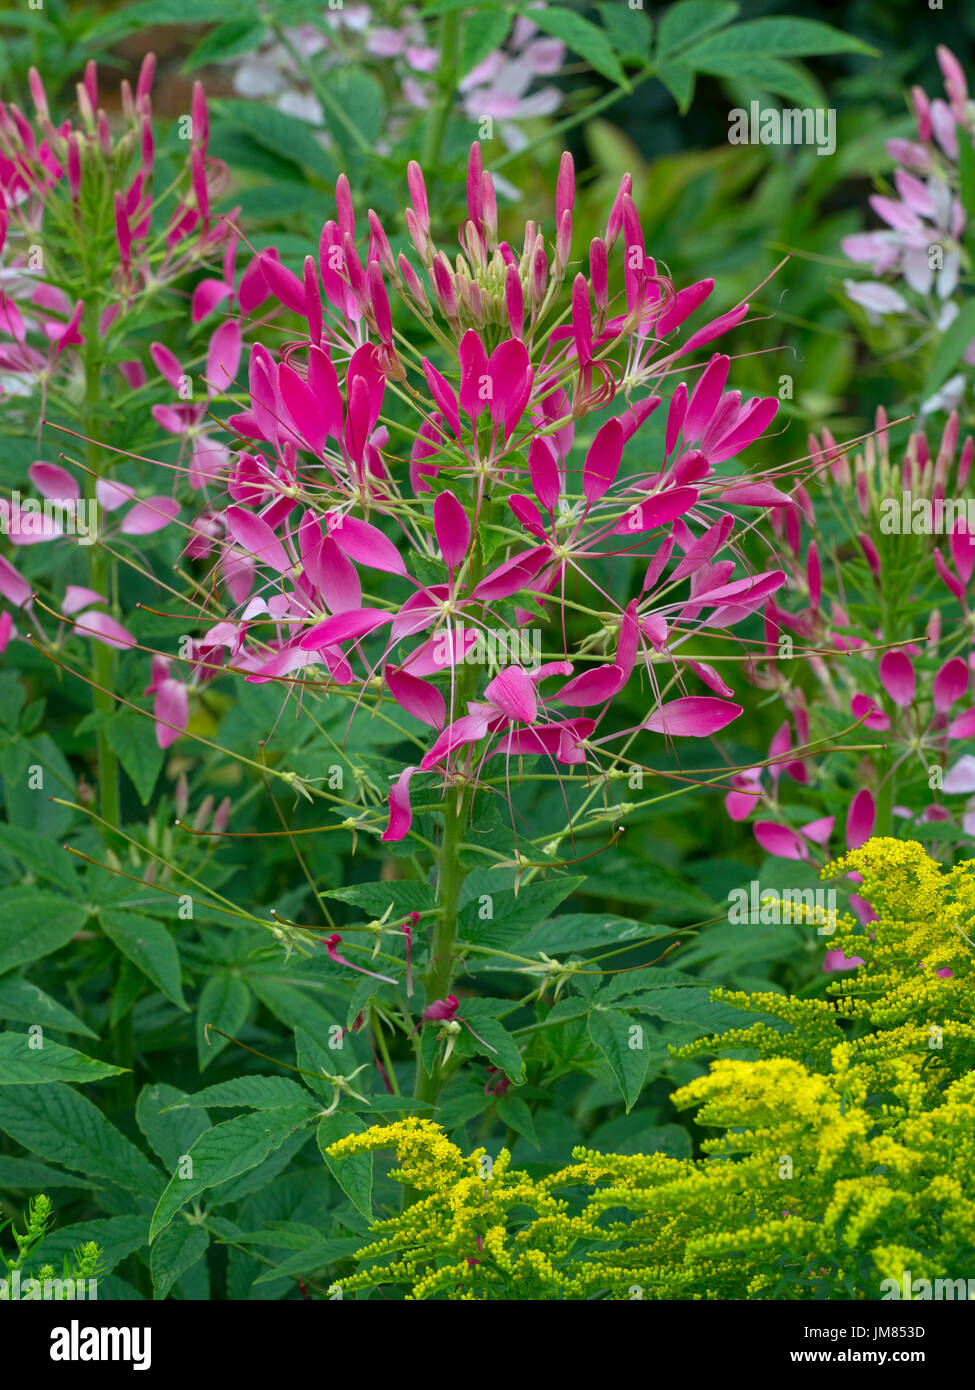 Cleome hassleriana or Spider plant in border with Golden Rod Stock Photo